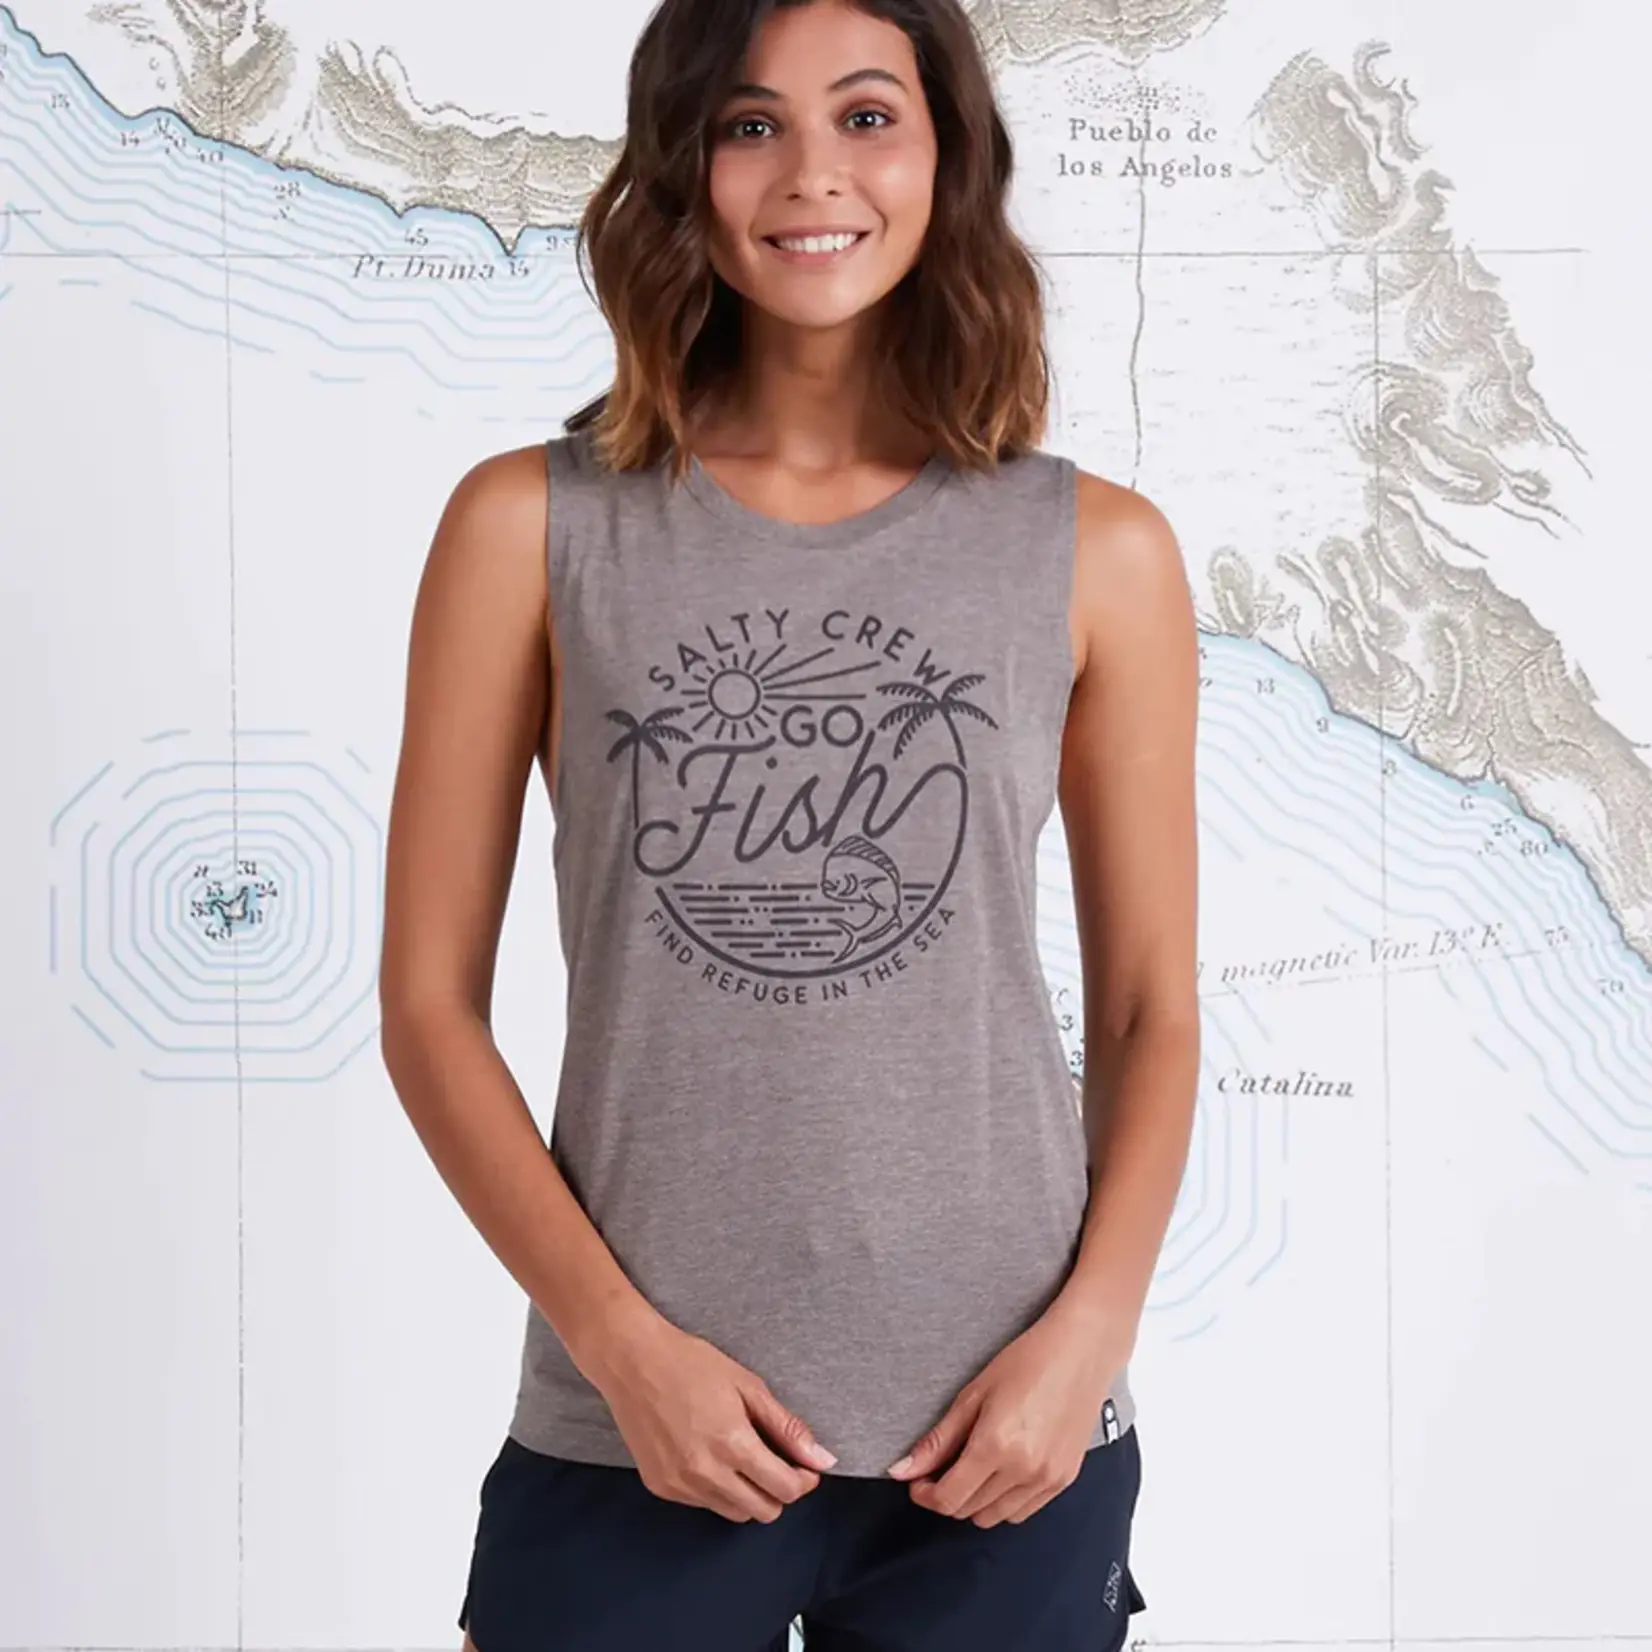 Salty Crew Go Fish Muscle Tank